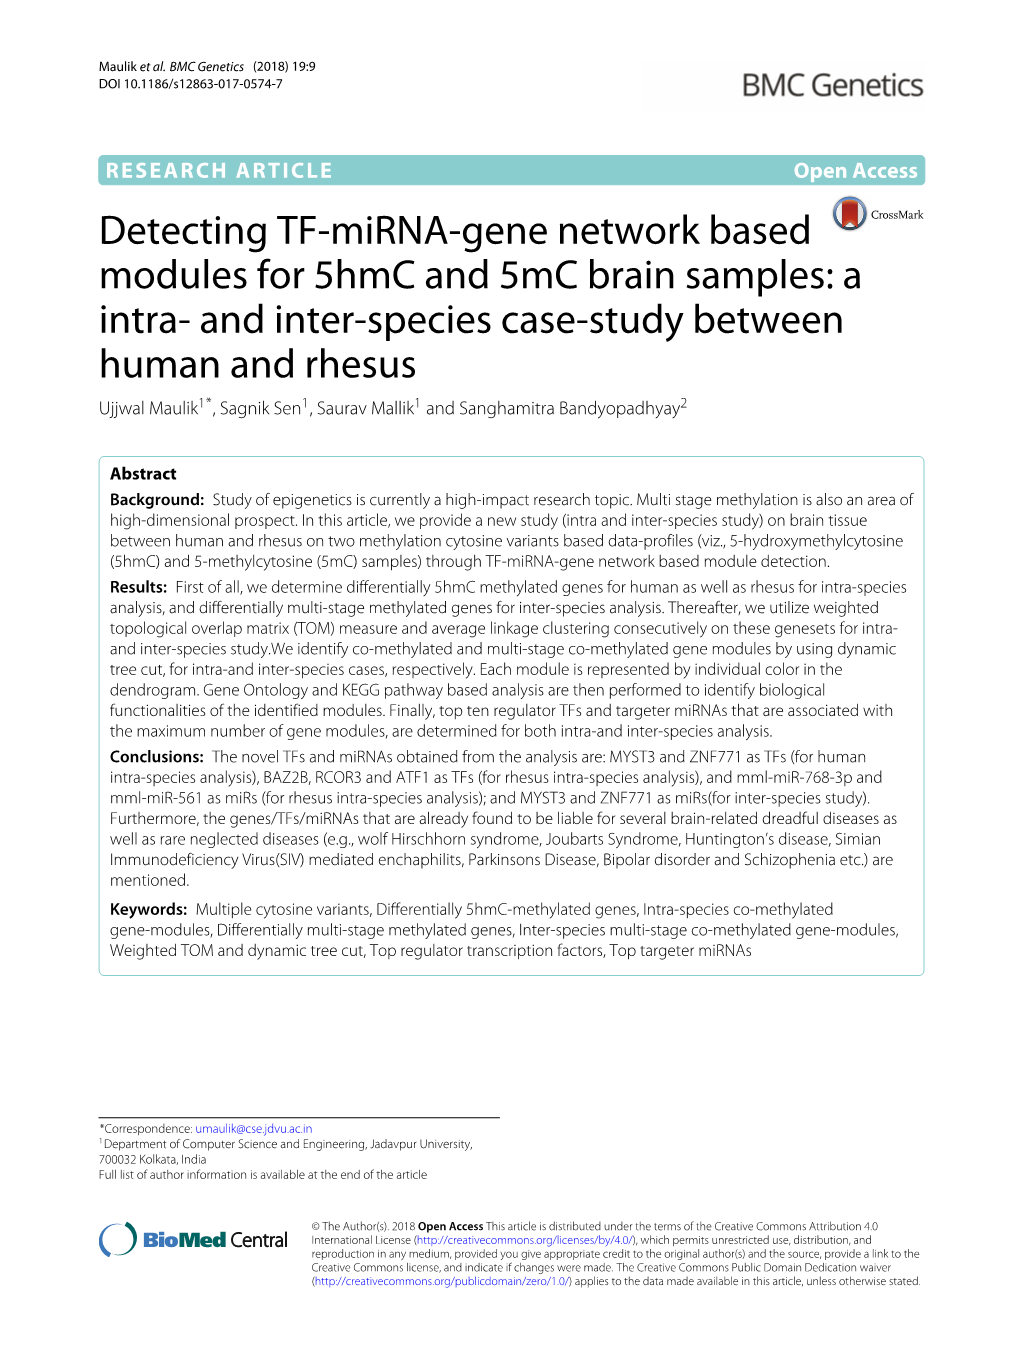 Detecting TF-Mirna-Gene Network Based Modules for 5Hmc and 5Mc Brain Samples: a Intra- and Inter-Species Case-Study Between Huma